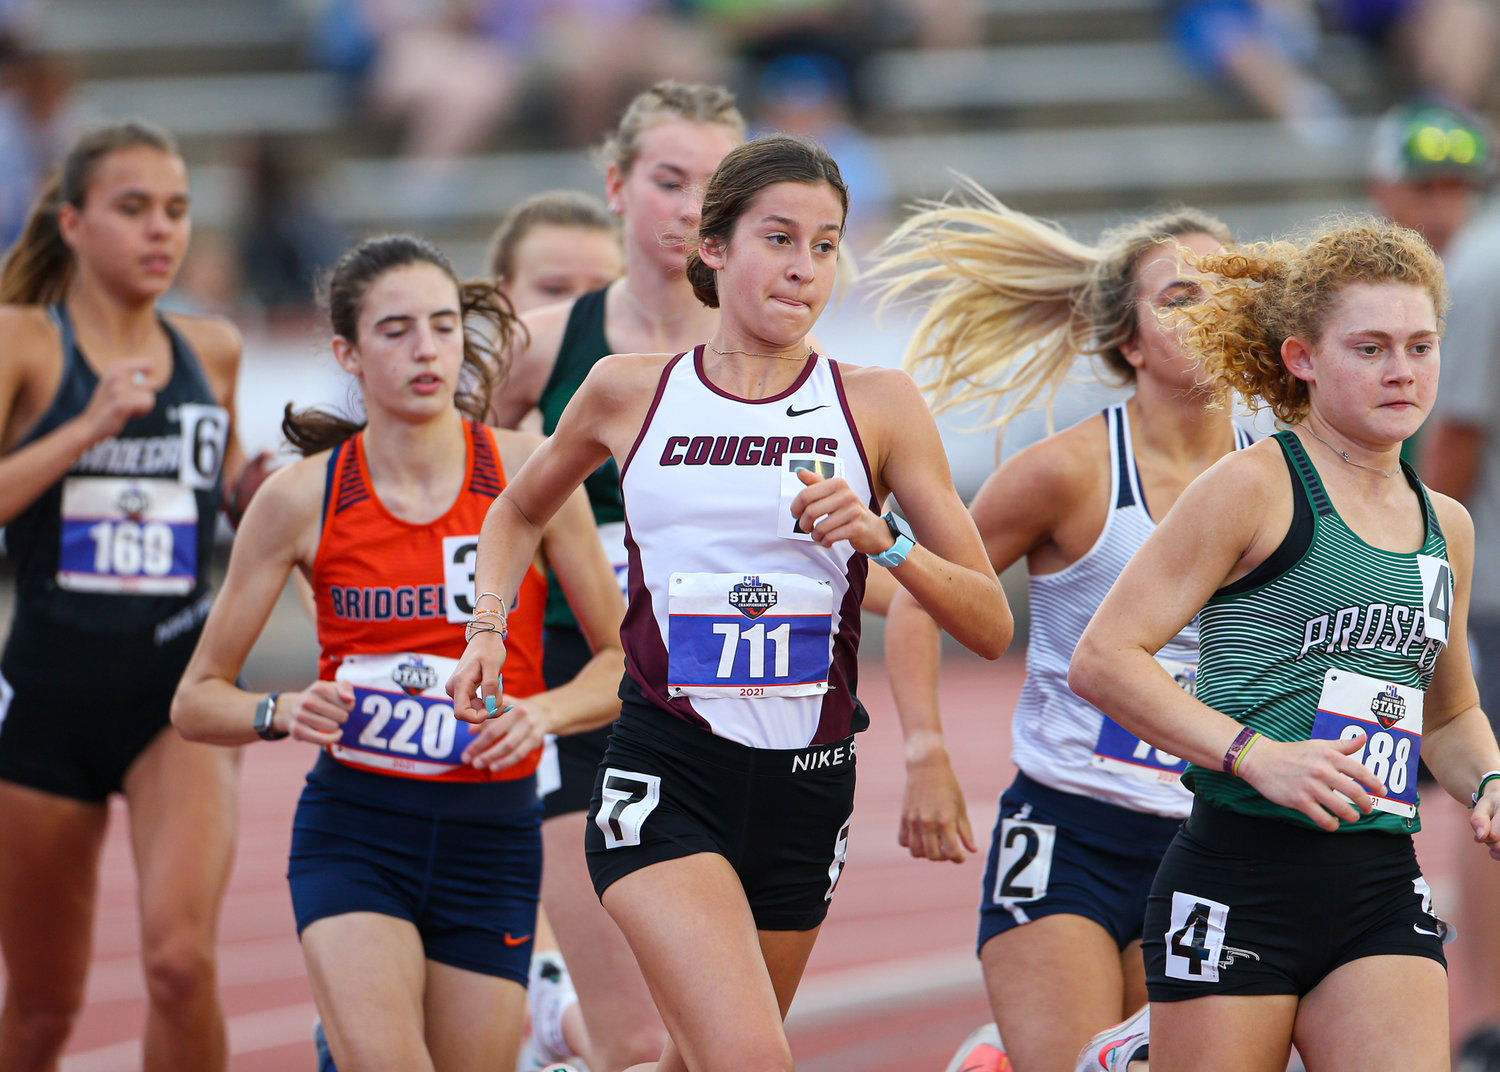 Sophie Atkinson of Cinco Ranch High School runs in the Class 6A girls 3200 meter run at the UIL State Track and Field Meet on May 8, 2021 at Mike A. Myers Stadium in Austin, Texas. Atkinson earned a silver medal in the event.